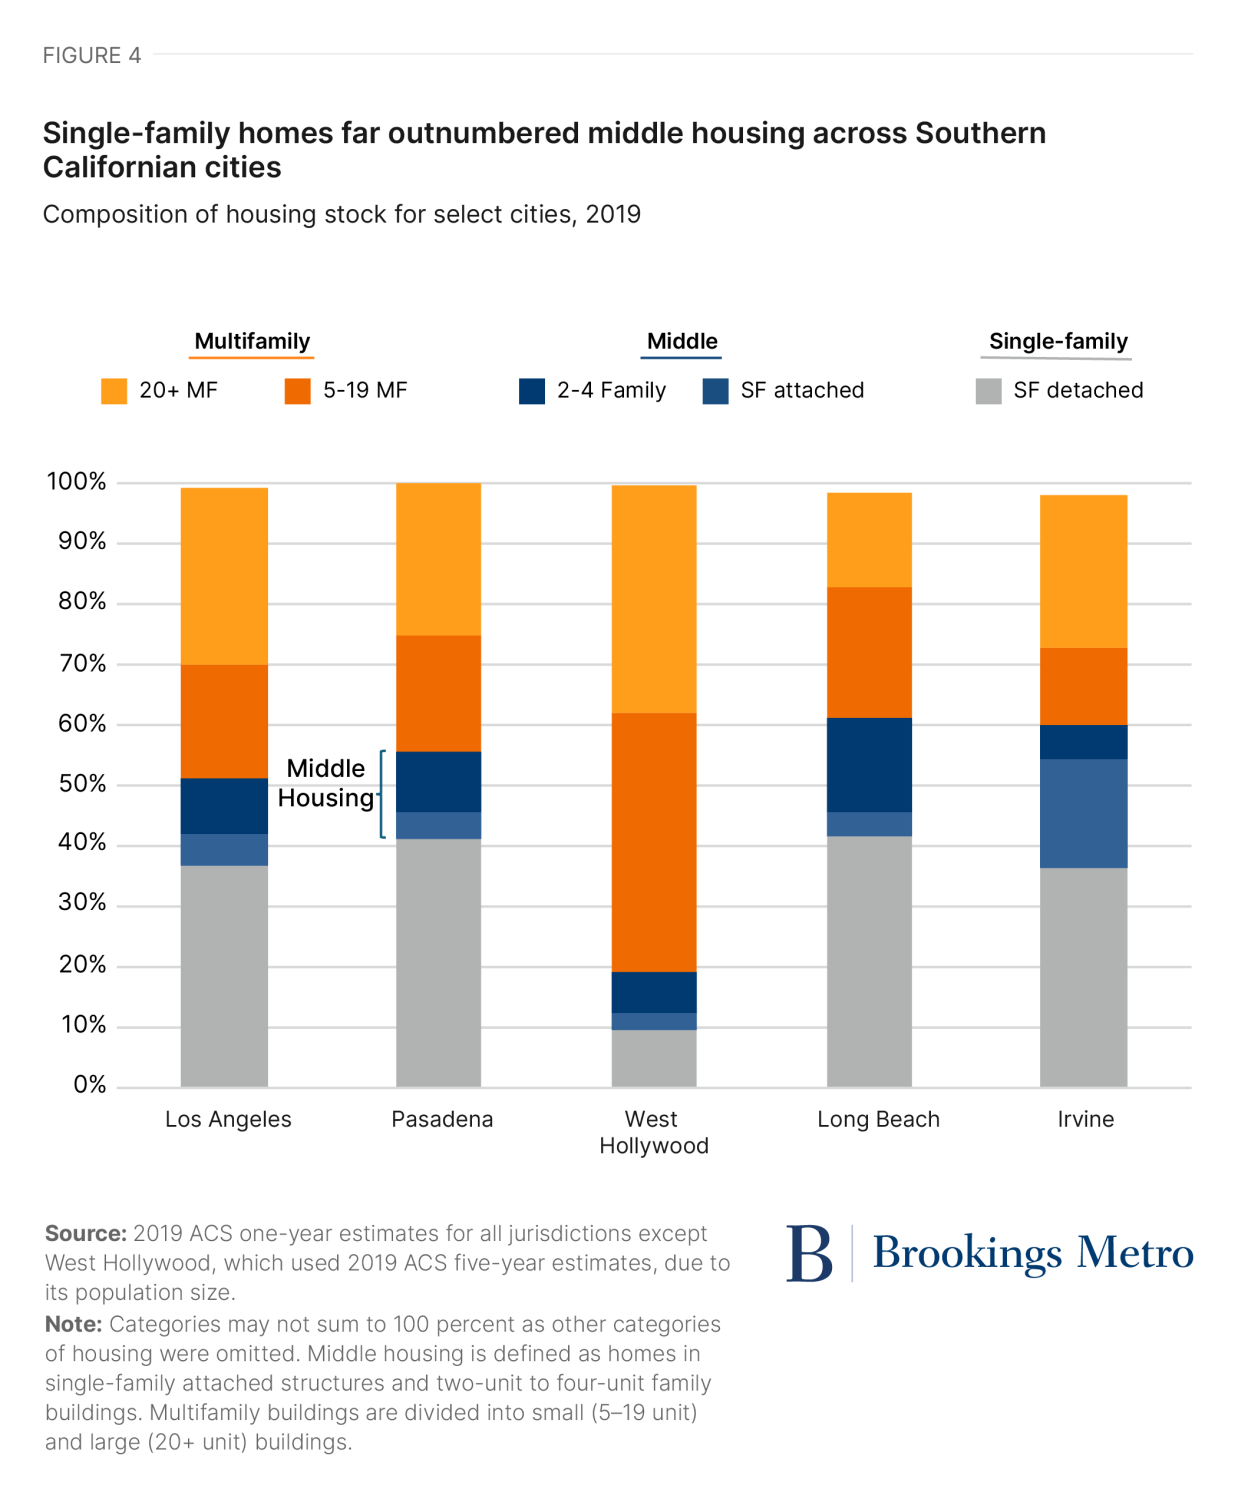 Figure 4: Single-family homes far outnumbered middle housing across Southern Californian cities